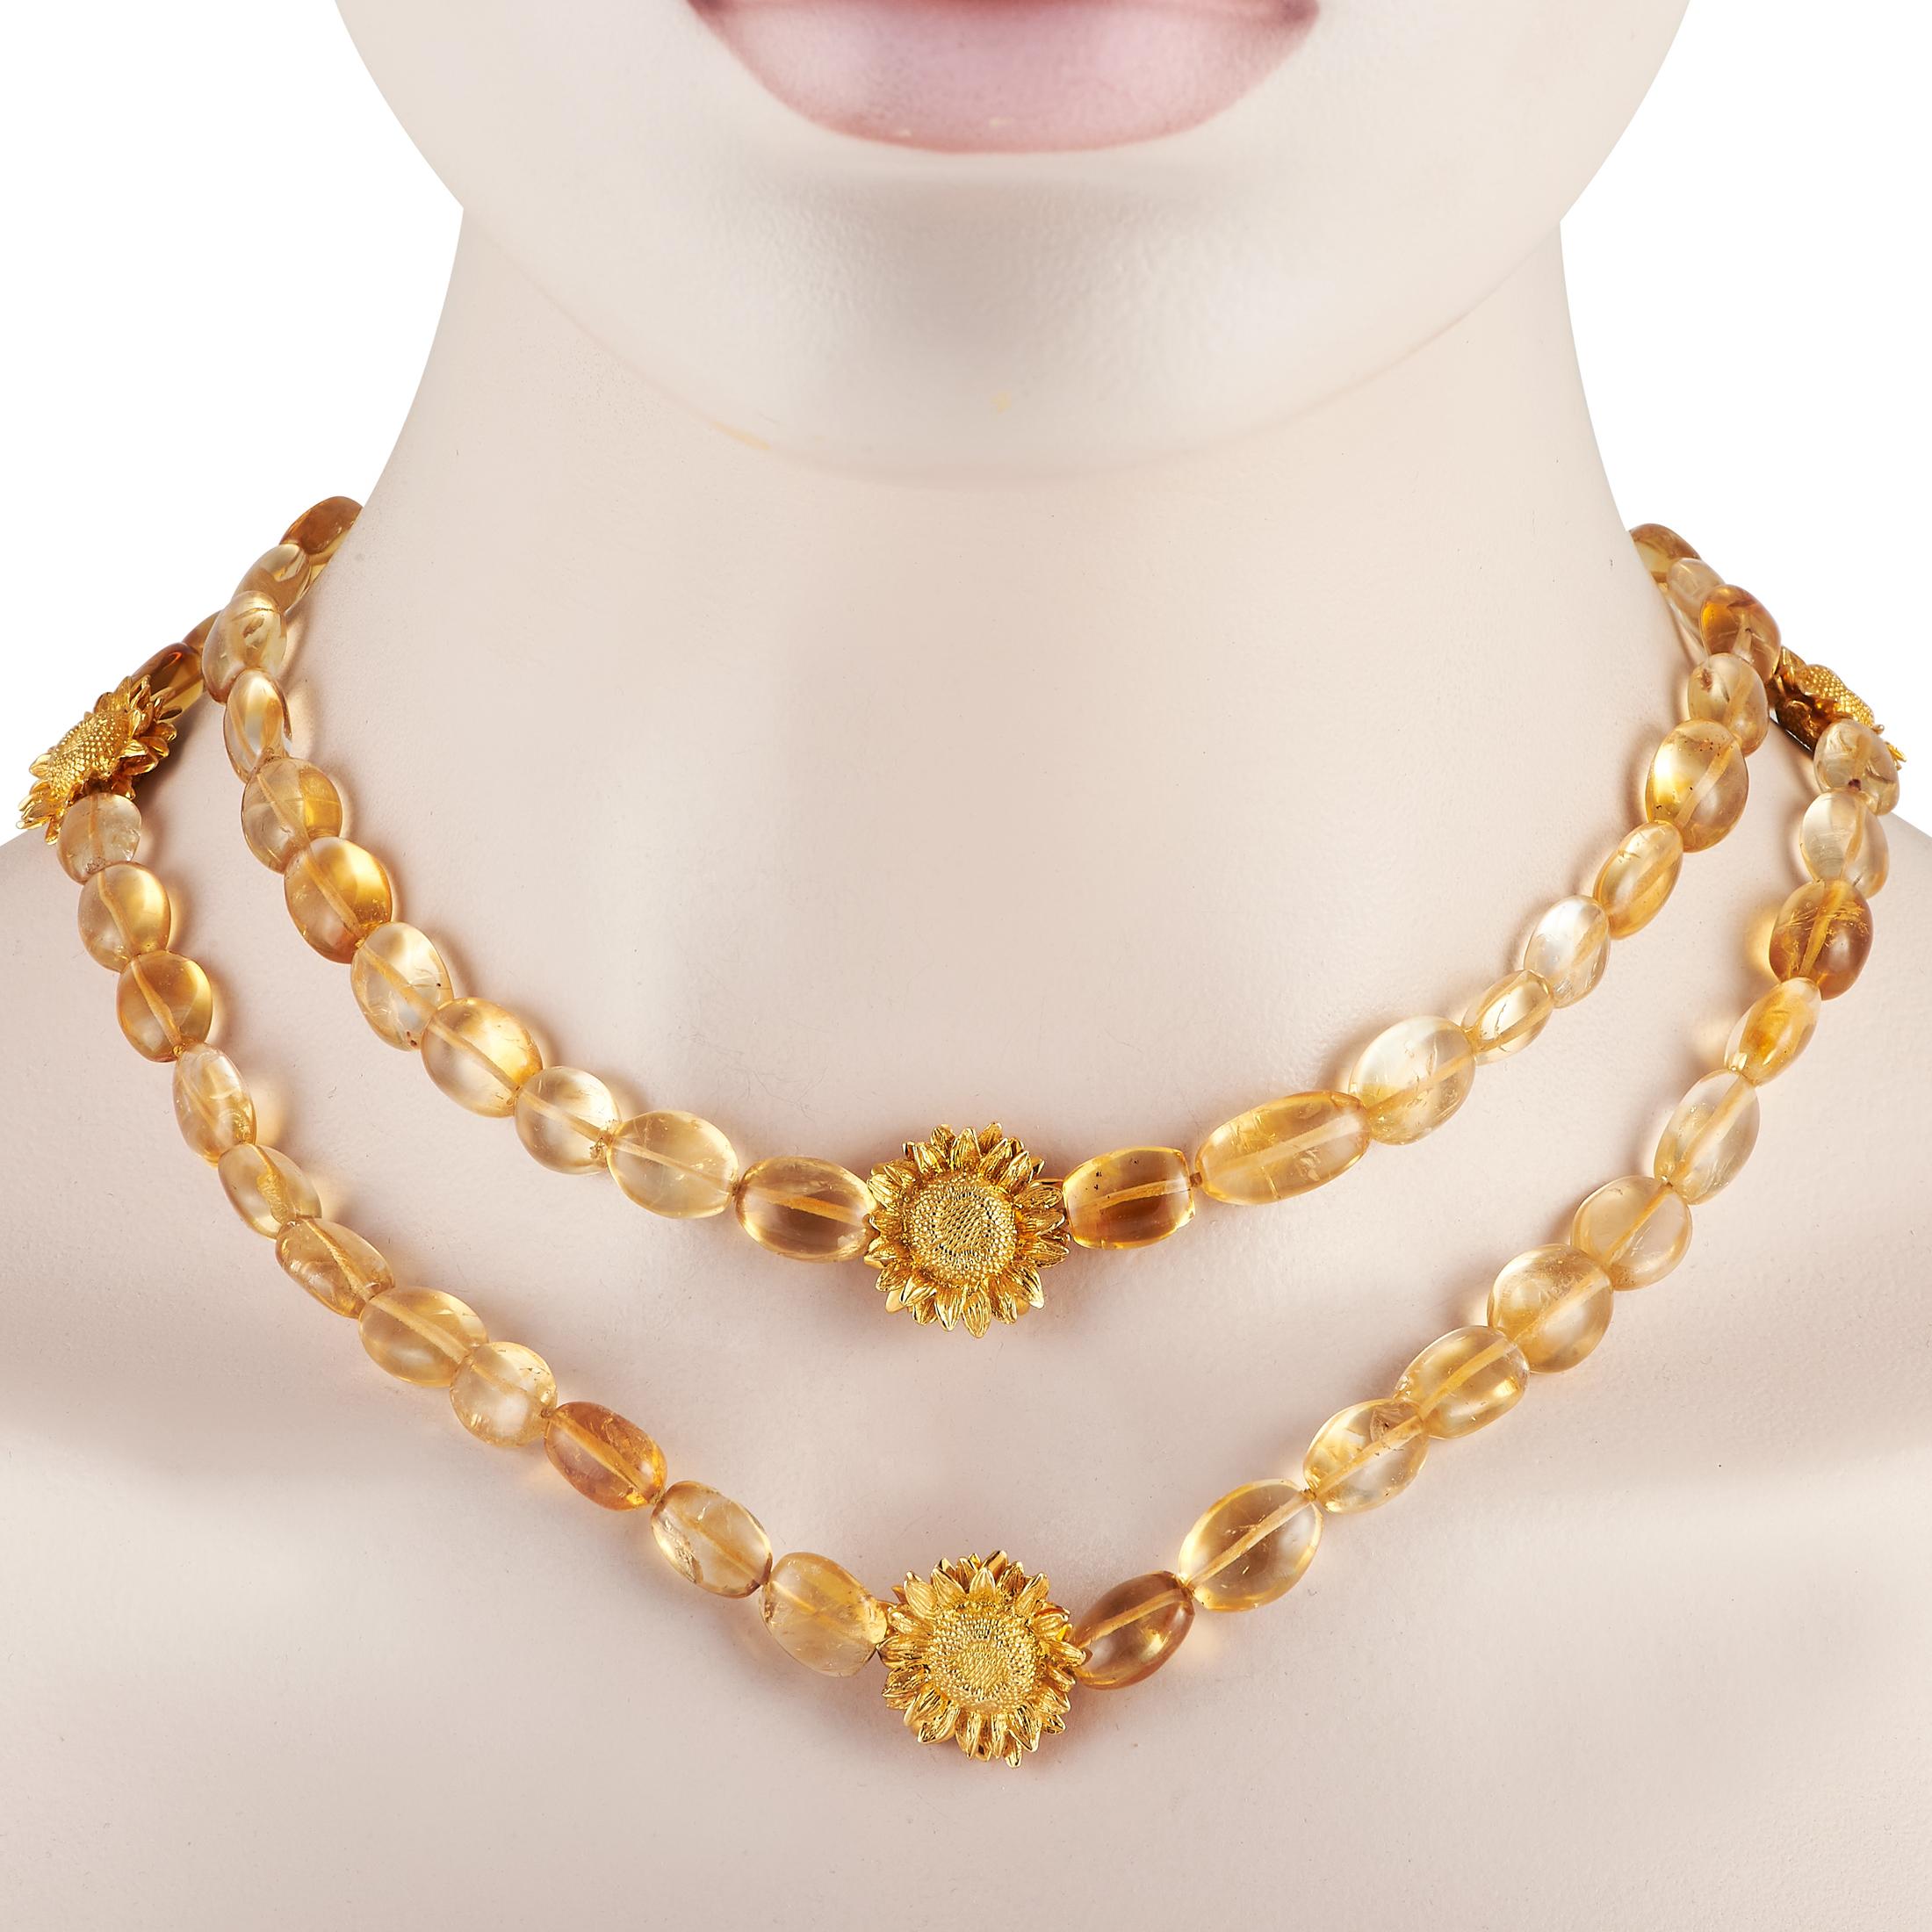 Give your basic and monochromatic outfits a glowing update through this LB Exclusive necklace. This piece features a 37.5